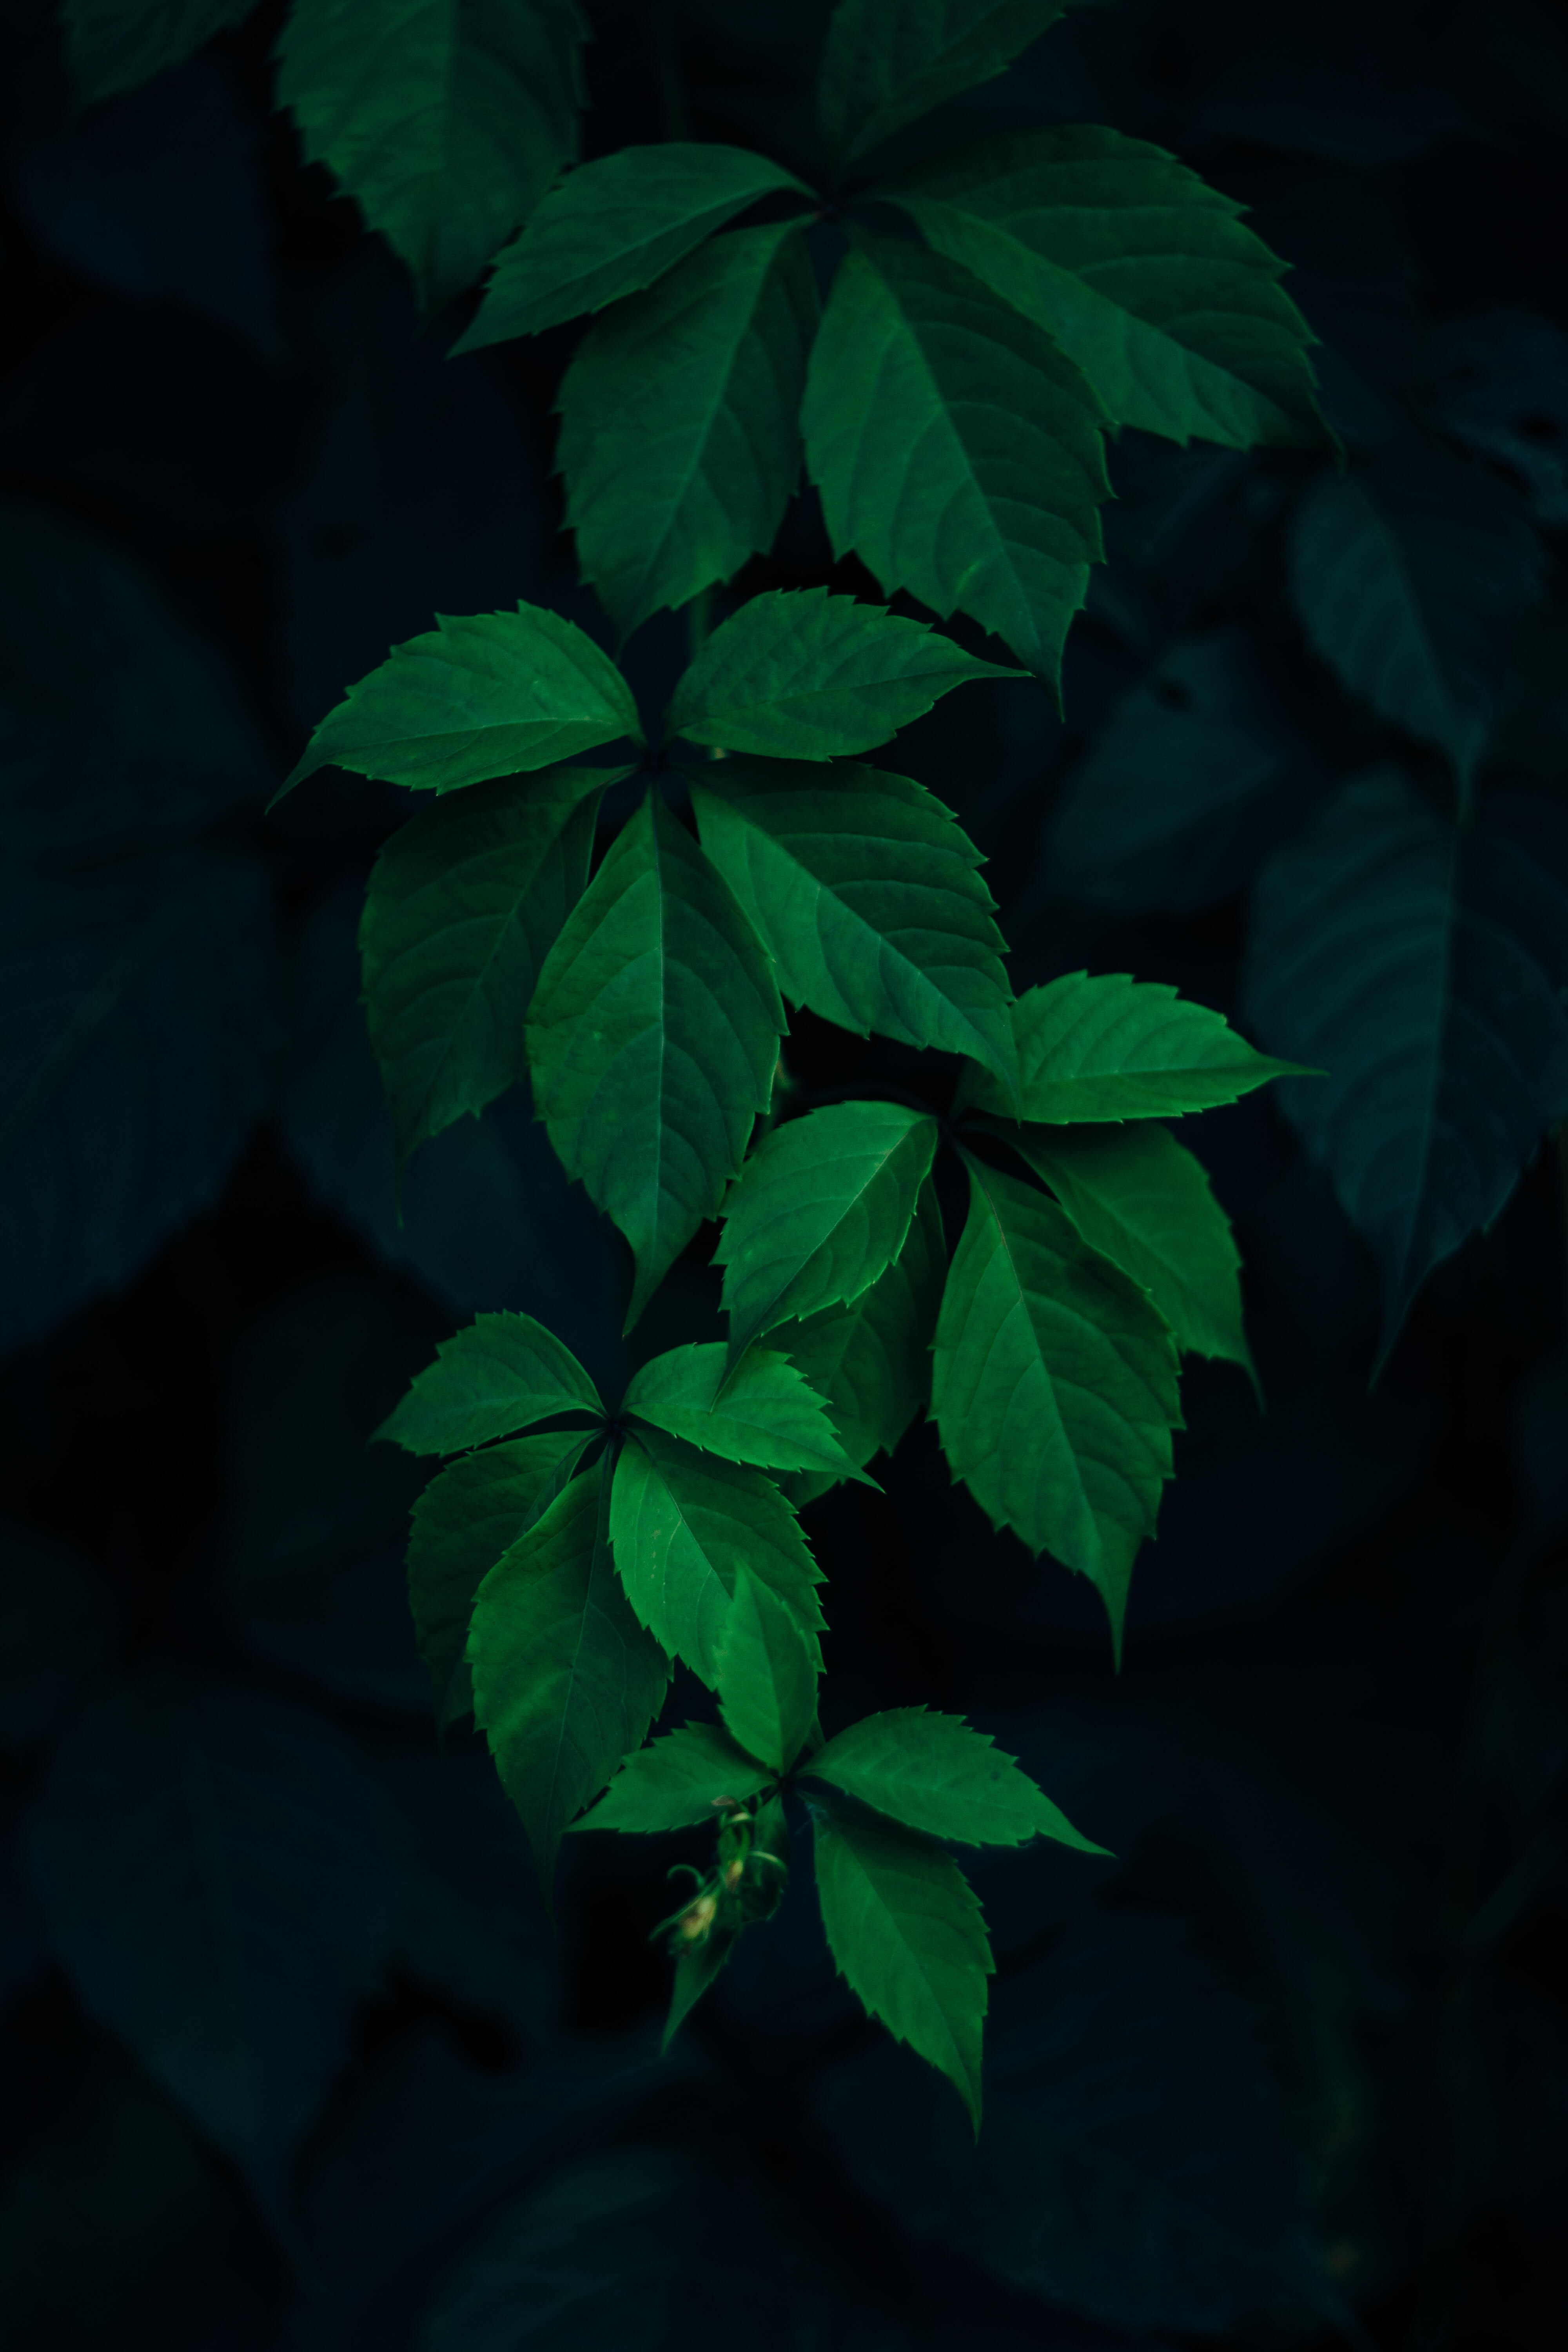 Green leaves on a dark leafy background.